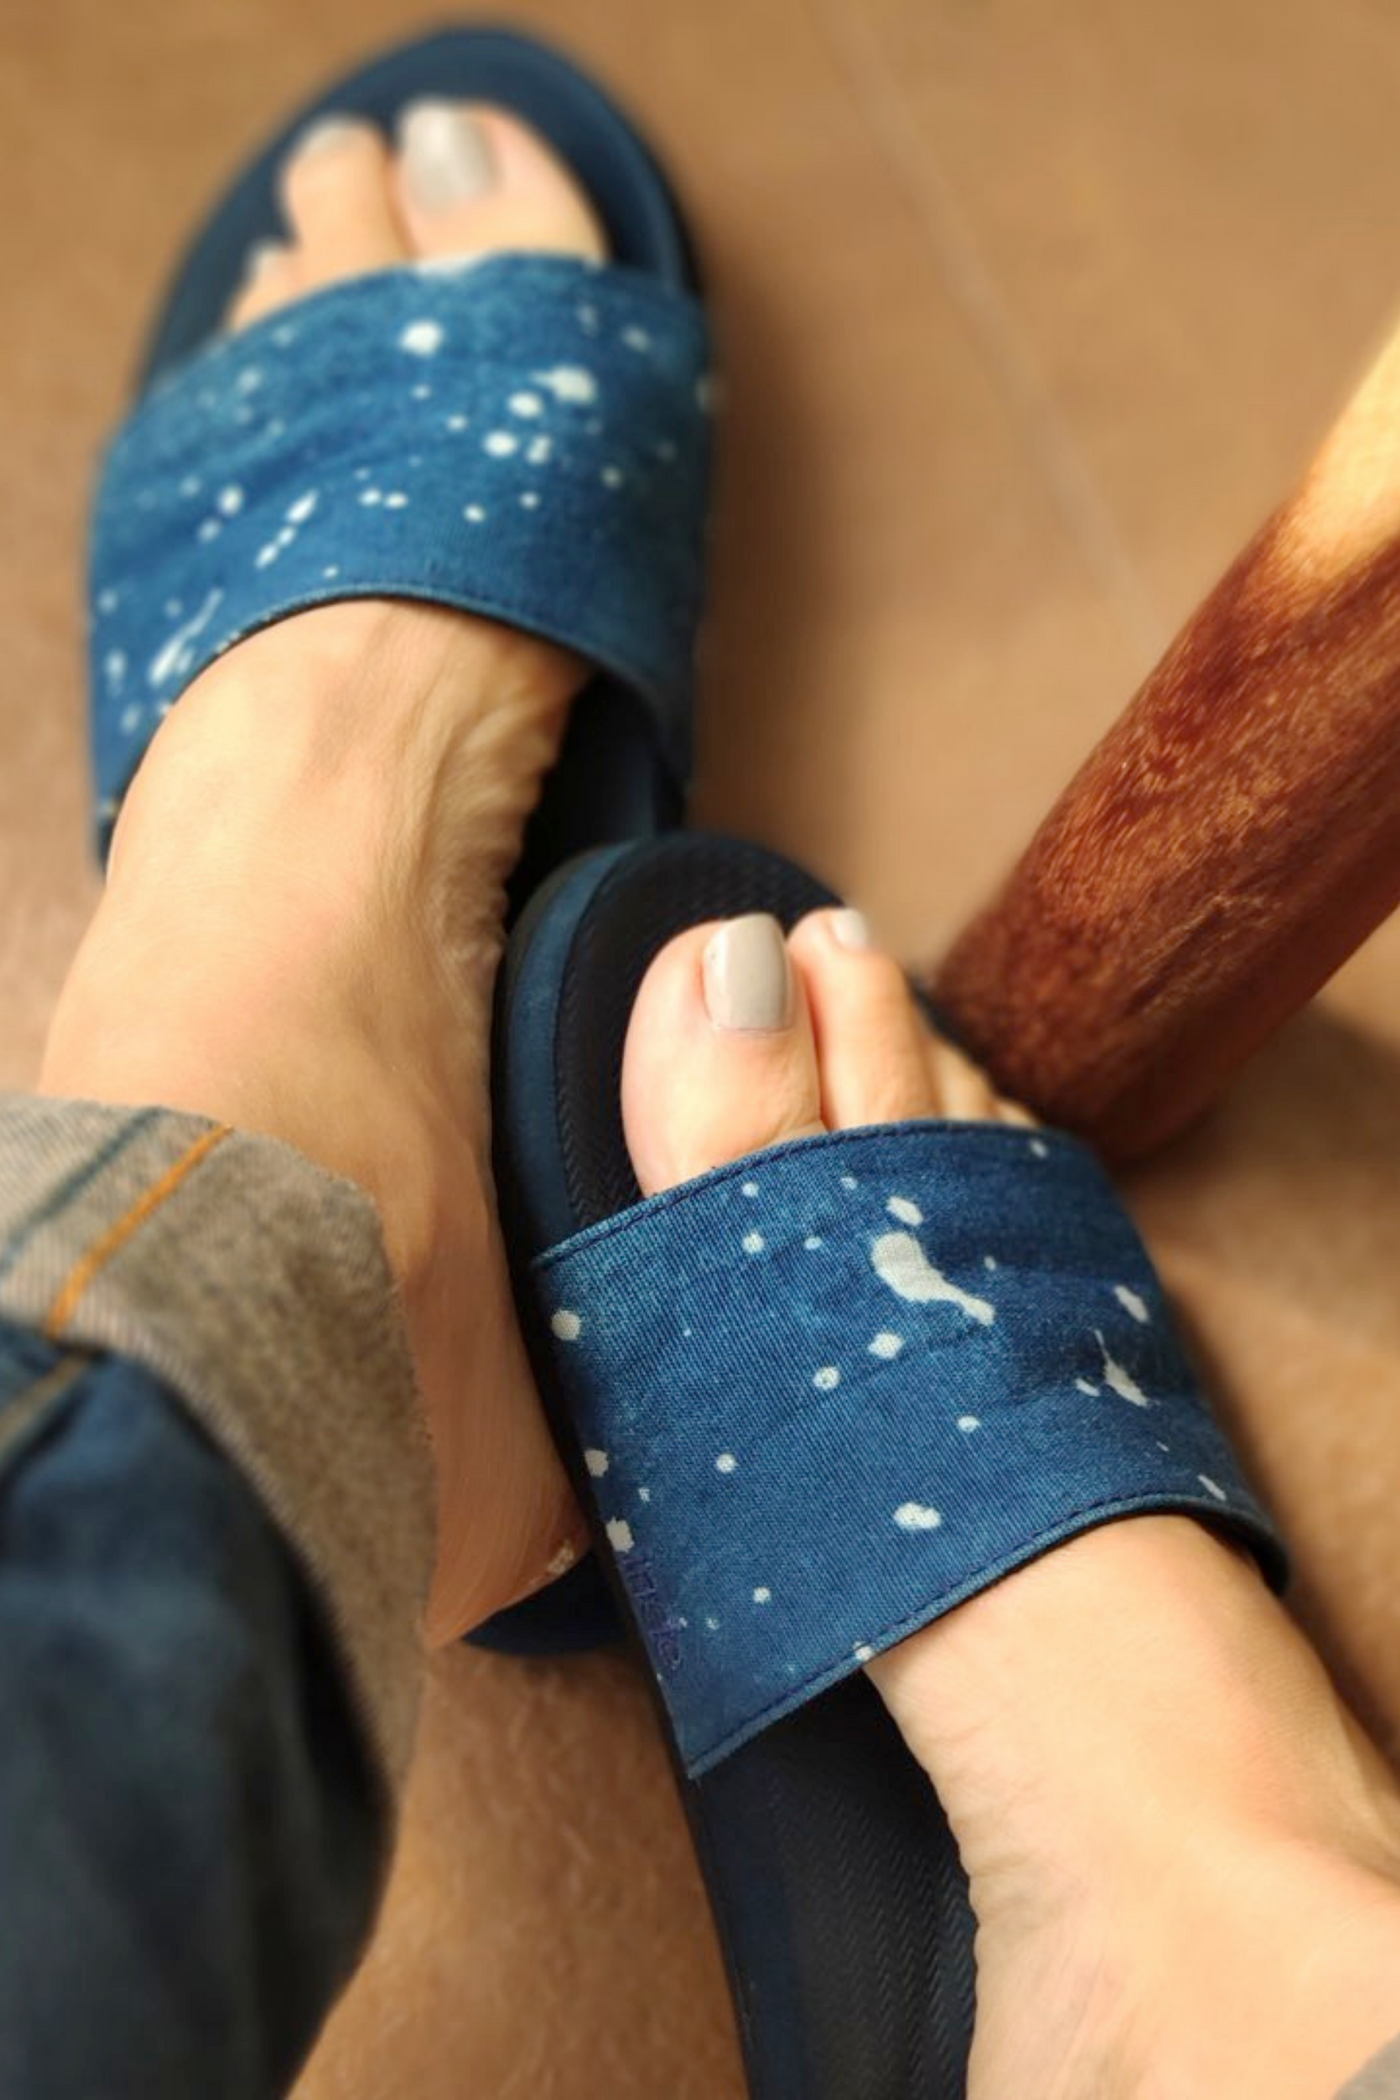 Indosole Women’s ESSNTLS Slides in Shore and Natural Indigo Drips, available on ZERRIN with free Singapore shipping